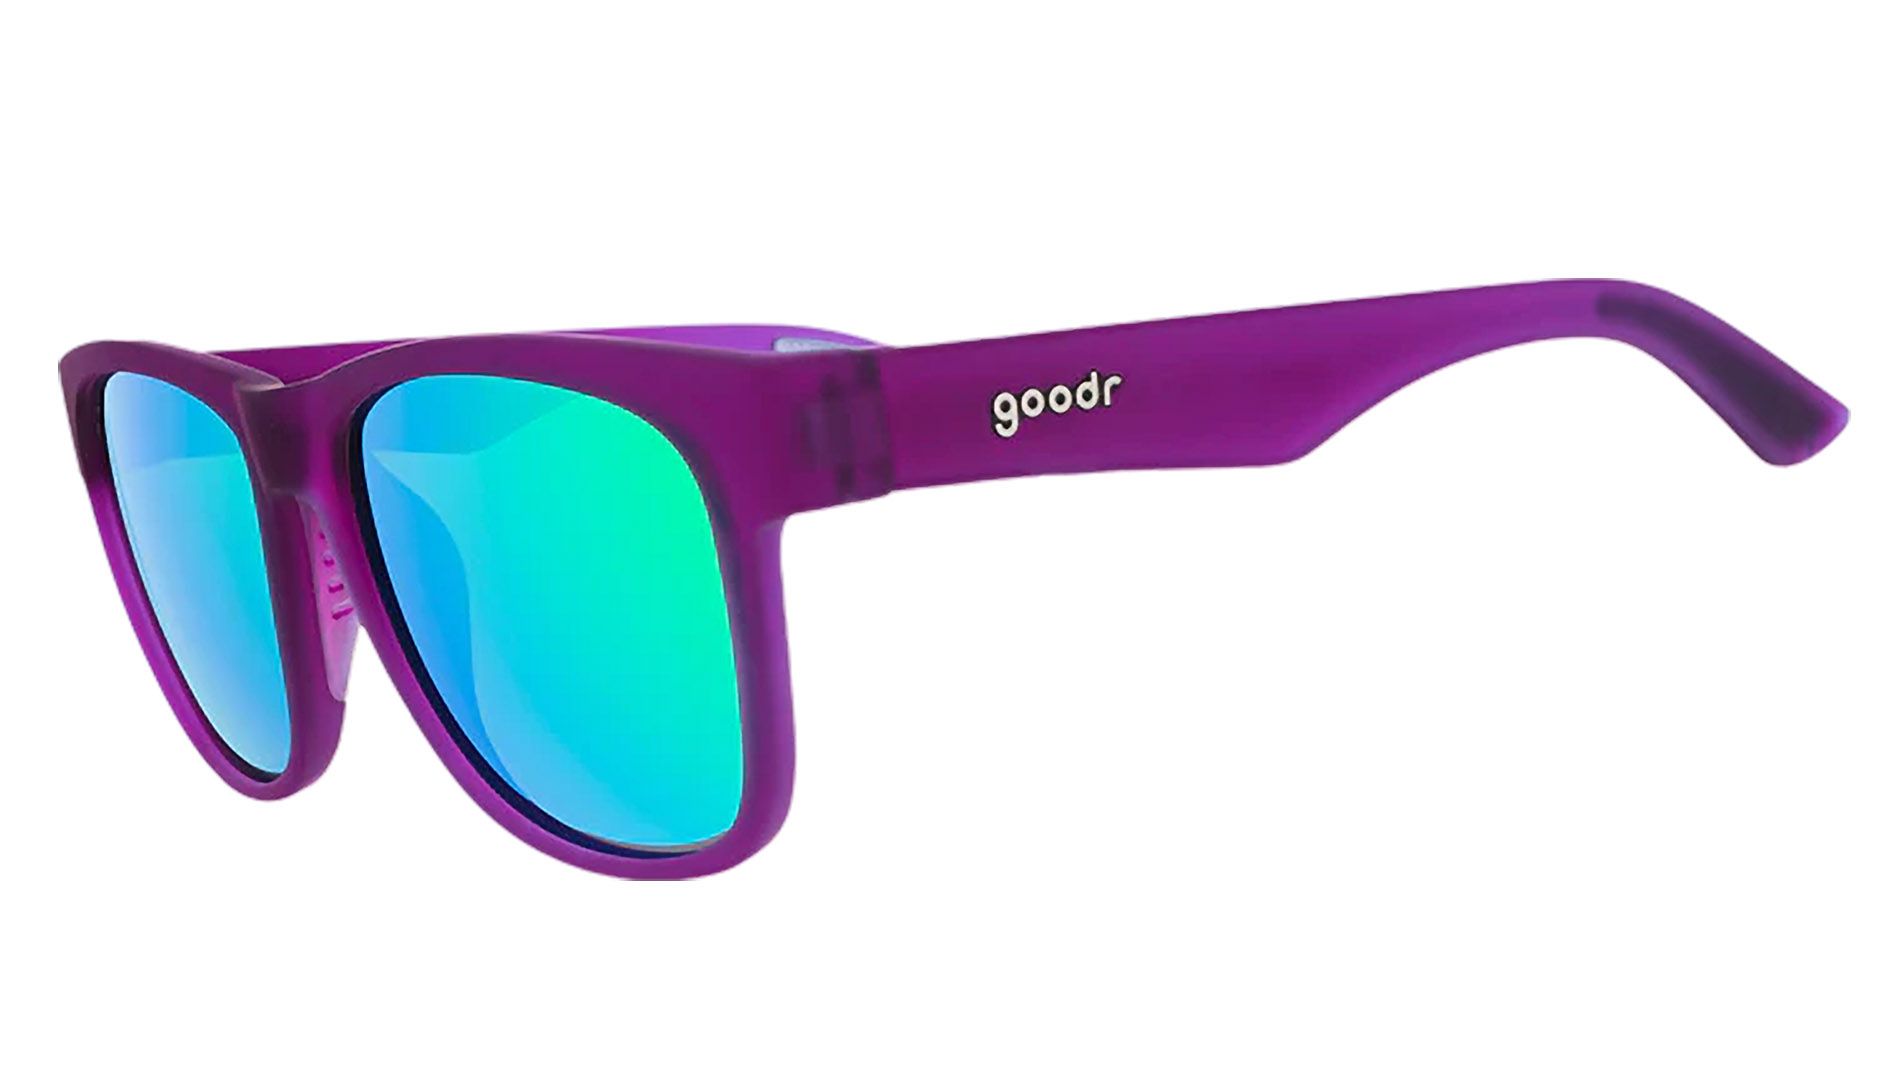 Photos - Sunglasses Goodr Colossal Squid Confessions Polarized Reflective , Men's 24